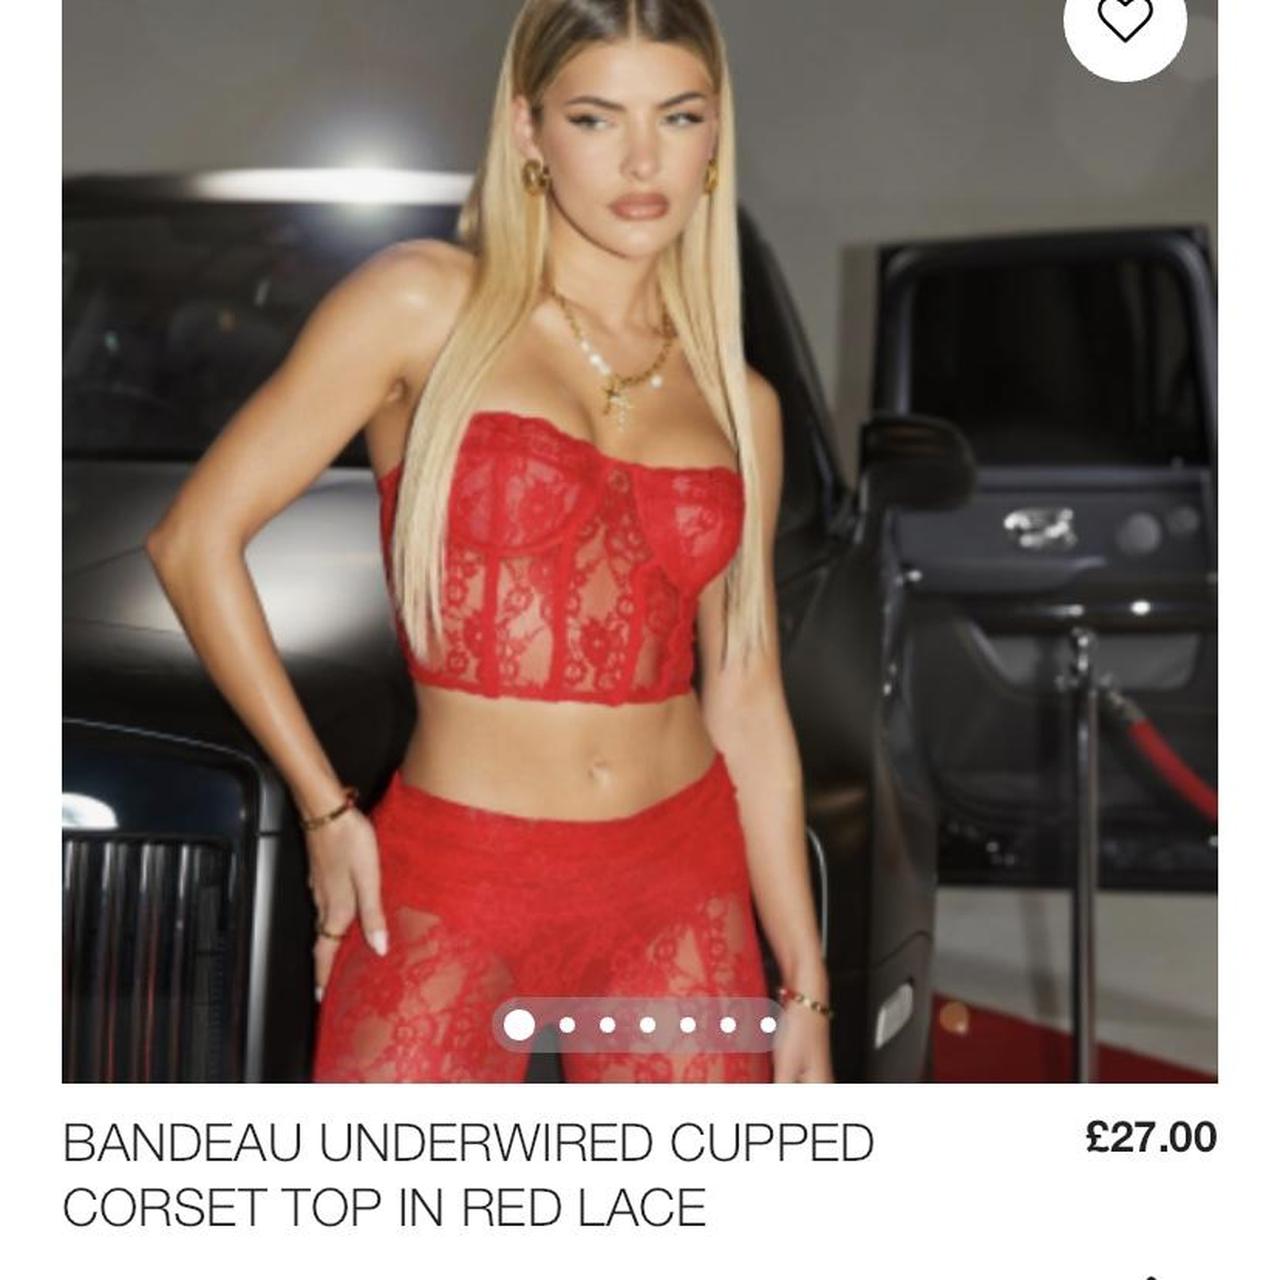 Bandeau Underwired Cupped Corset Top In Red Lace